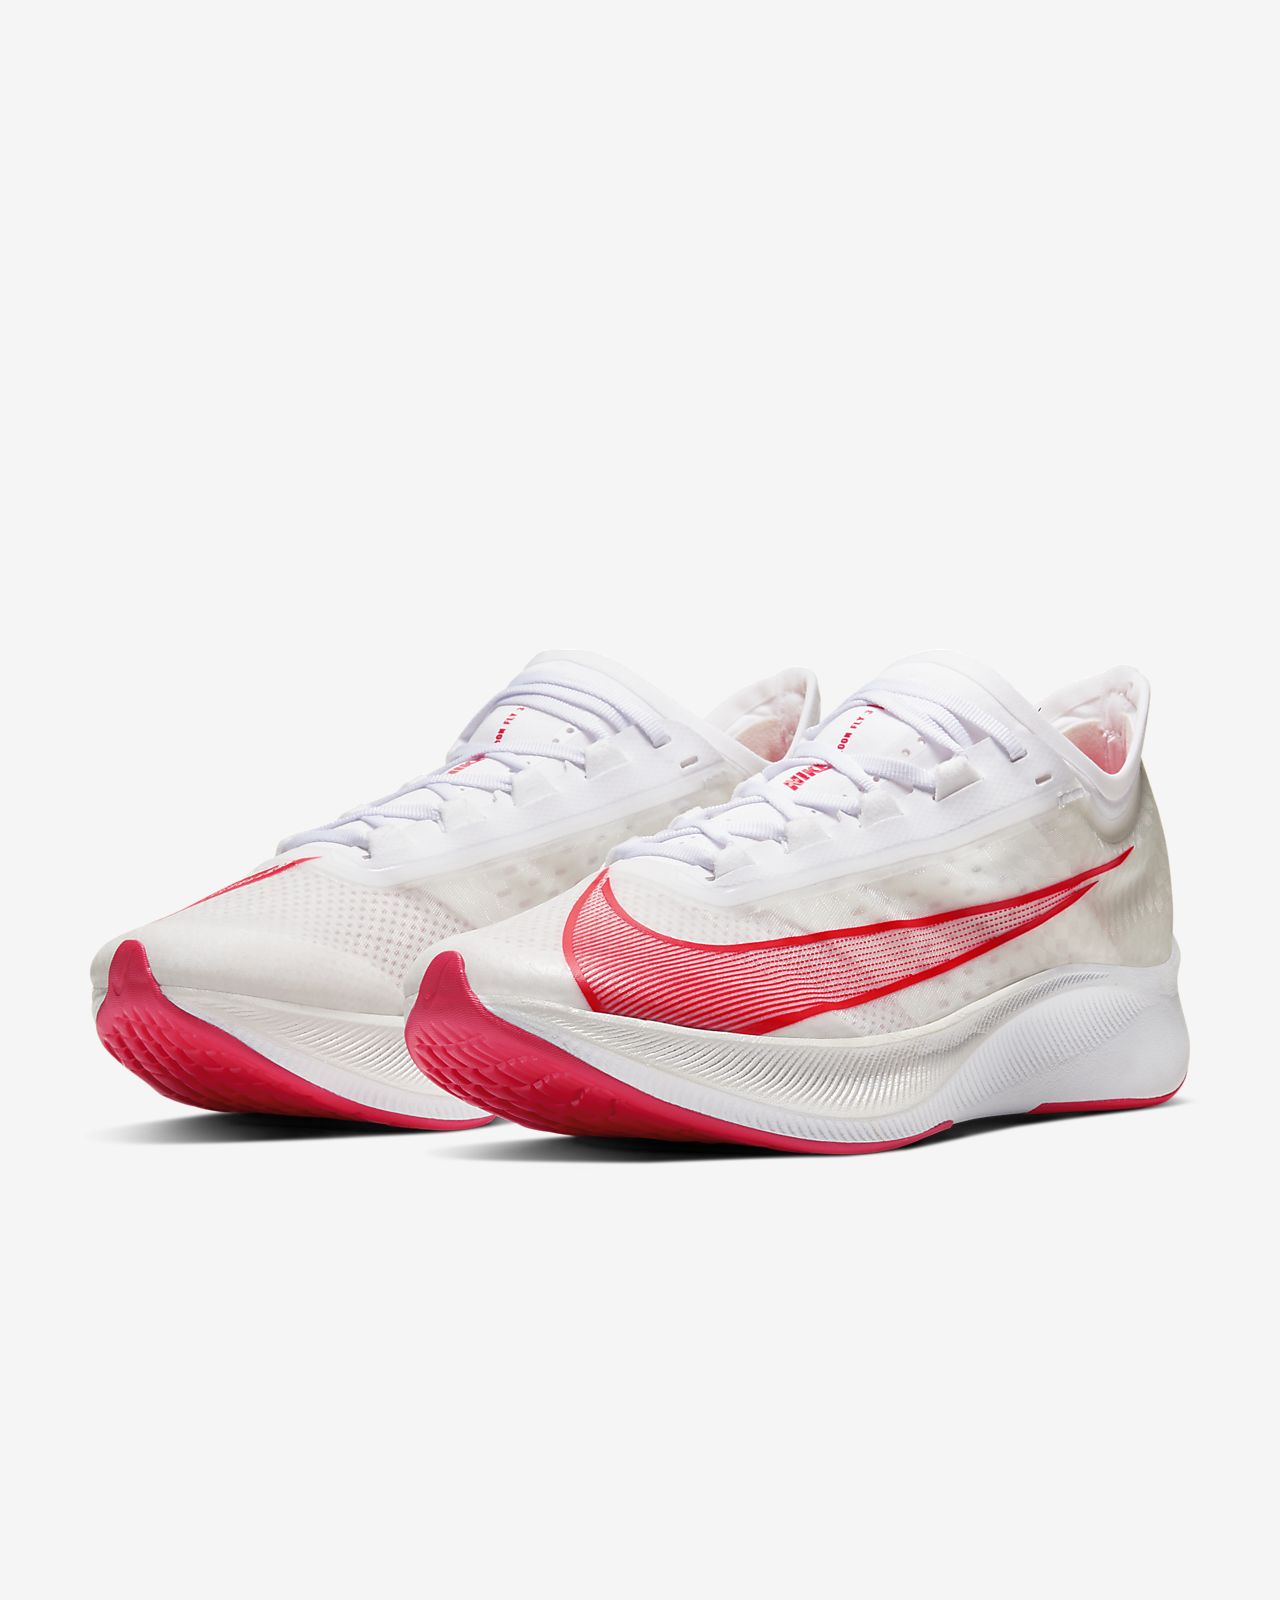 nike zoom fly 46 on sale a998b 09cac